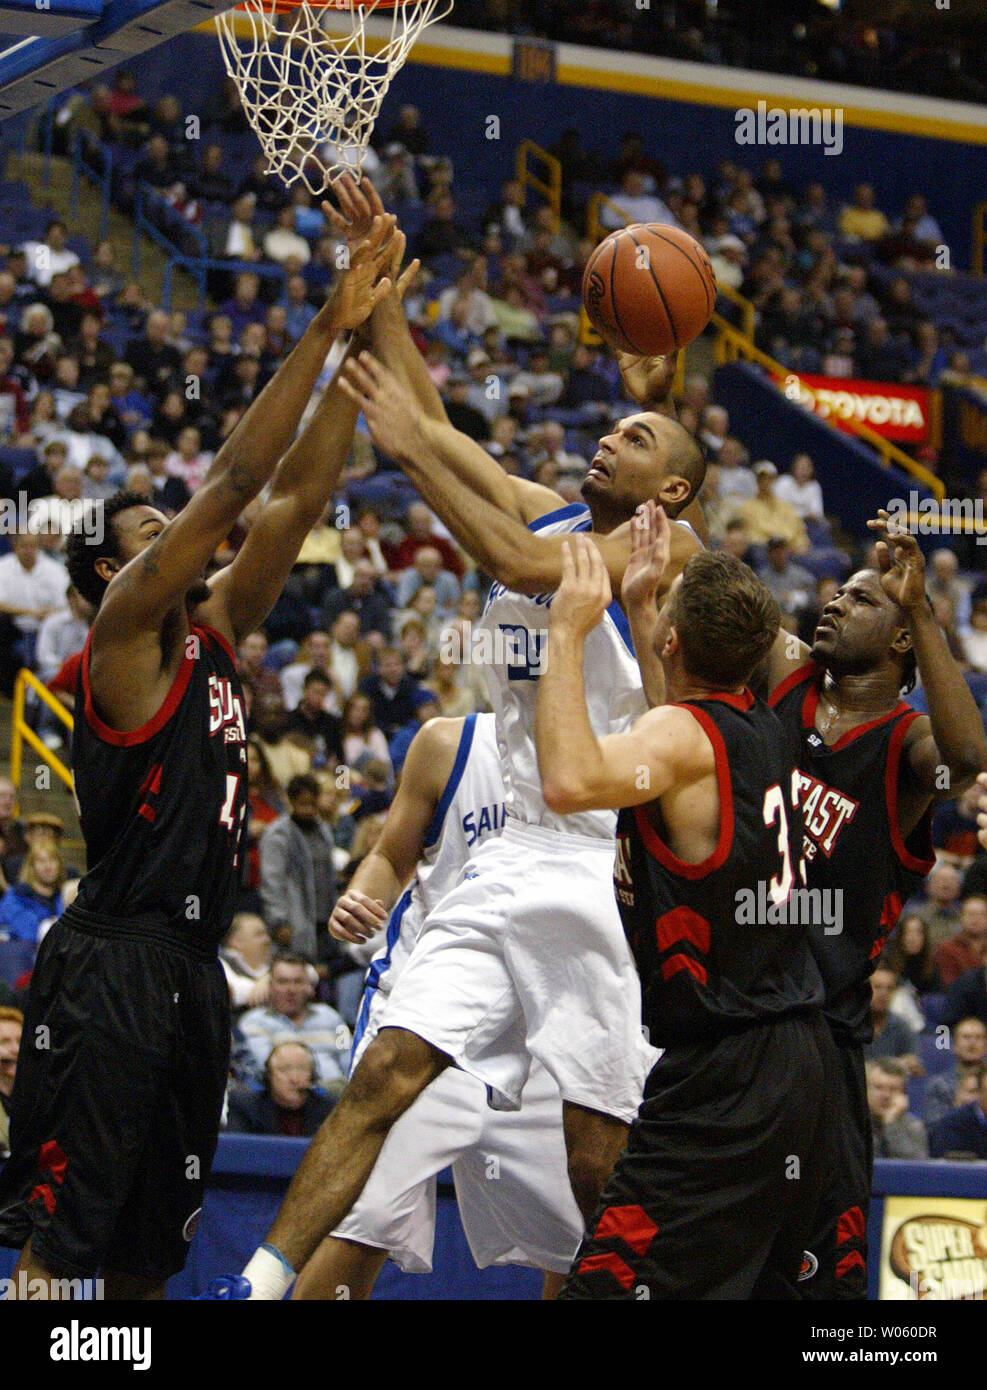 Saint Louis University Billikens Izik Ohanon (30) loses control of the basketball during a rebound attempt while being triple teamed by Southeast Missouri State Indians' (L to R) Waylon Francis, Dainmon Gonner and Derek Winans in the first half at the Savvis Center in St. Louis on December 29, 2004.   (UPI Photo/Bill Greenblatt) Stock Photo